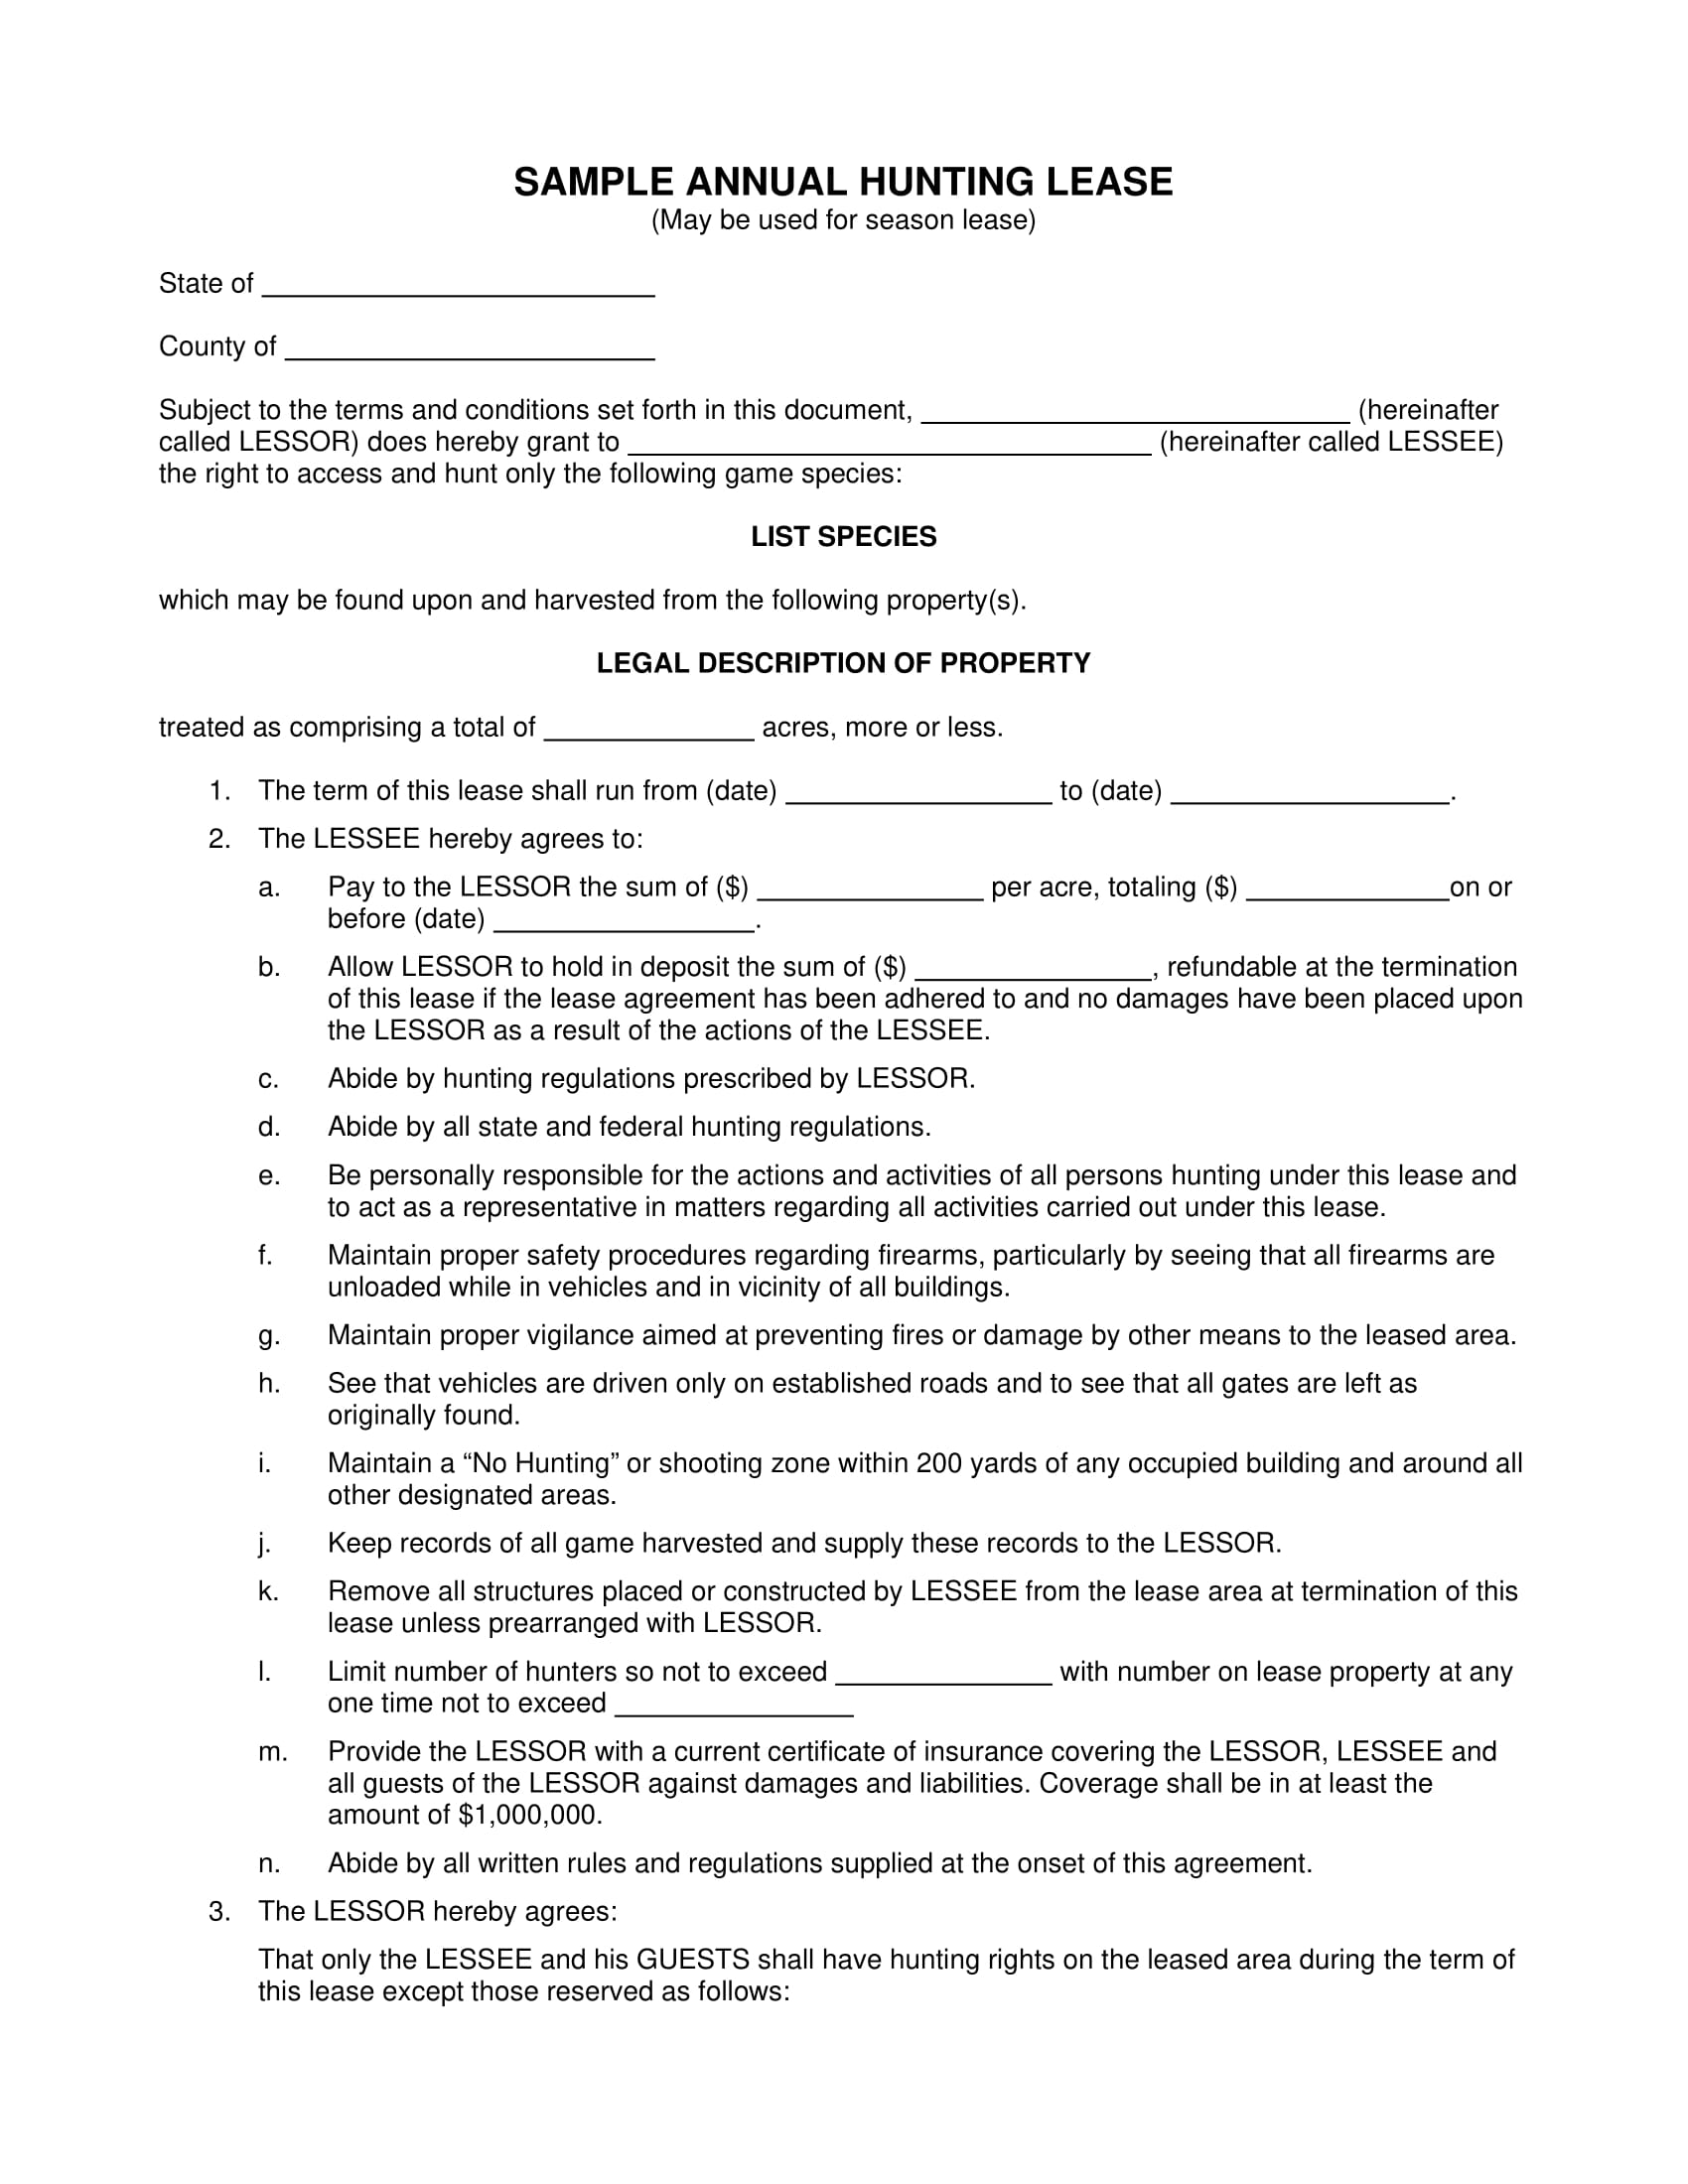 annual hunting lease contract form 1